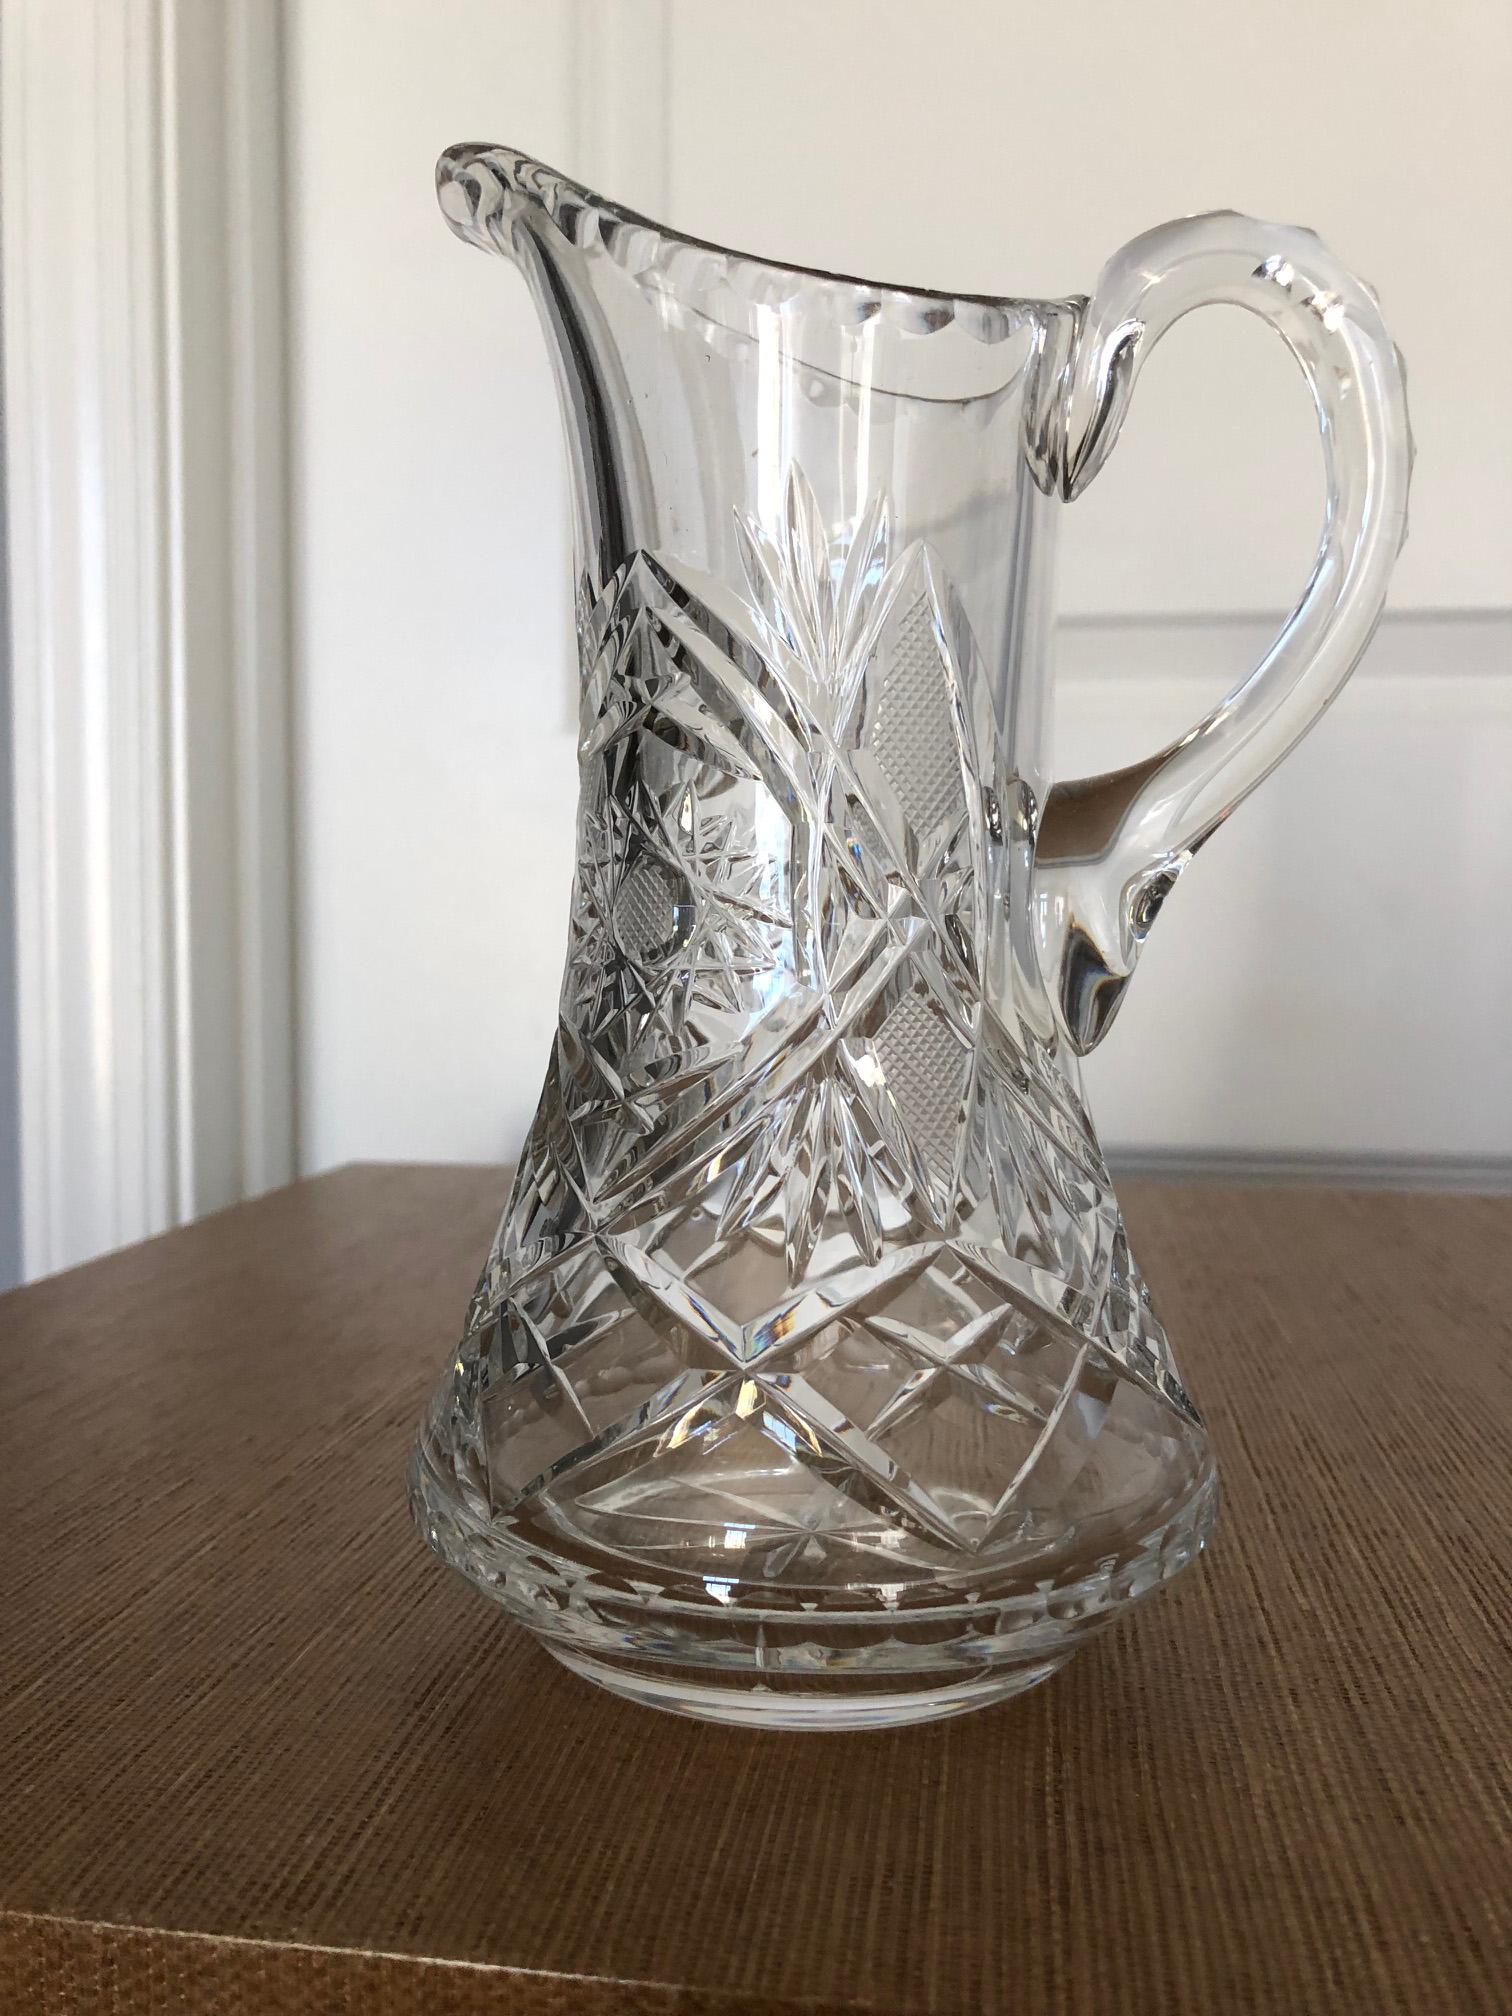 American Brilliant cut glass pitcher, maker and pattern unknown.